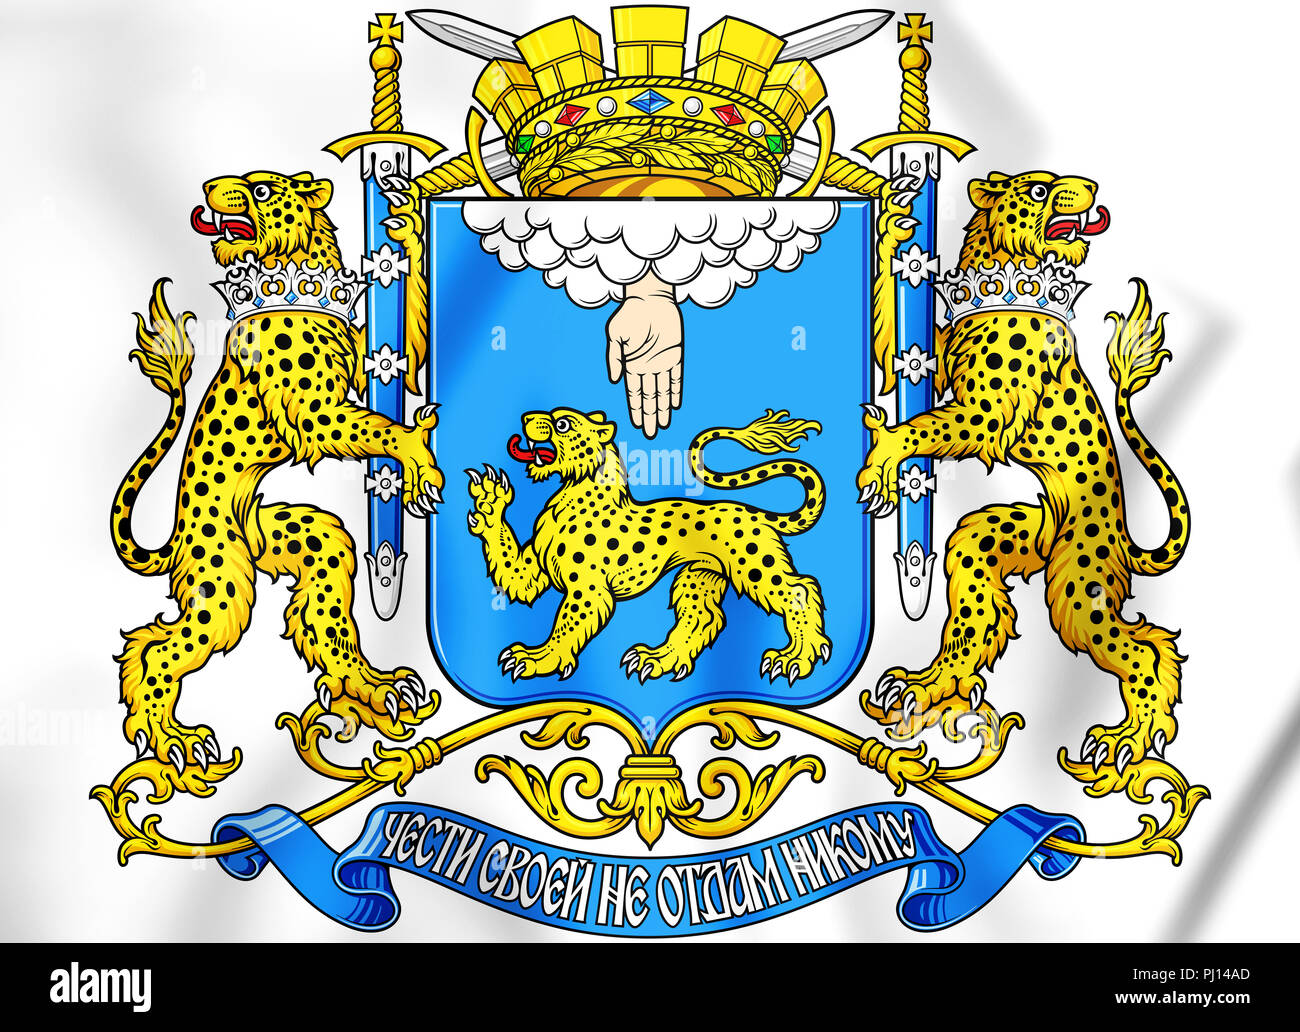 Flag of Russia. Coat of Arms. Stock Vector by ©Igor_Vkv 120838898